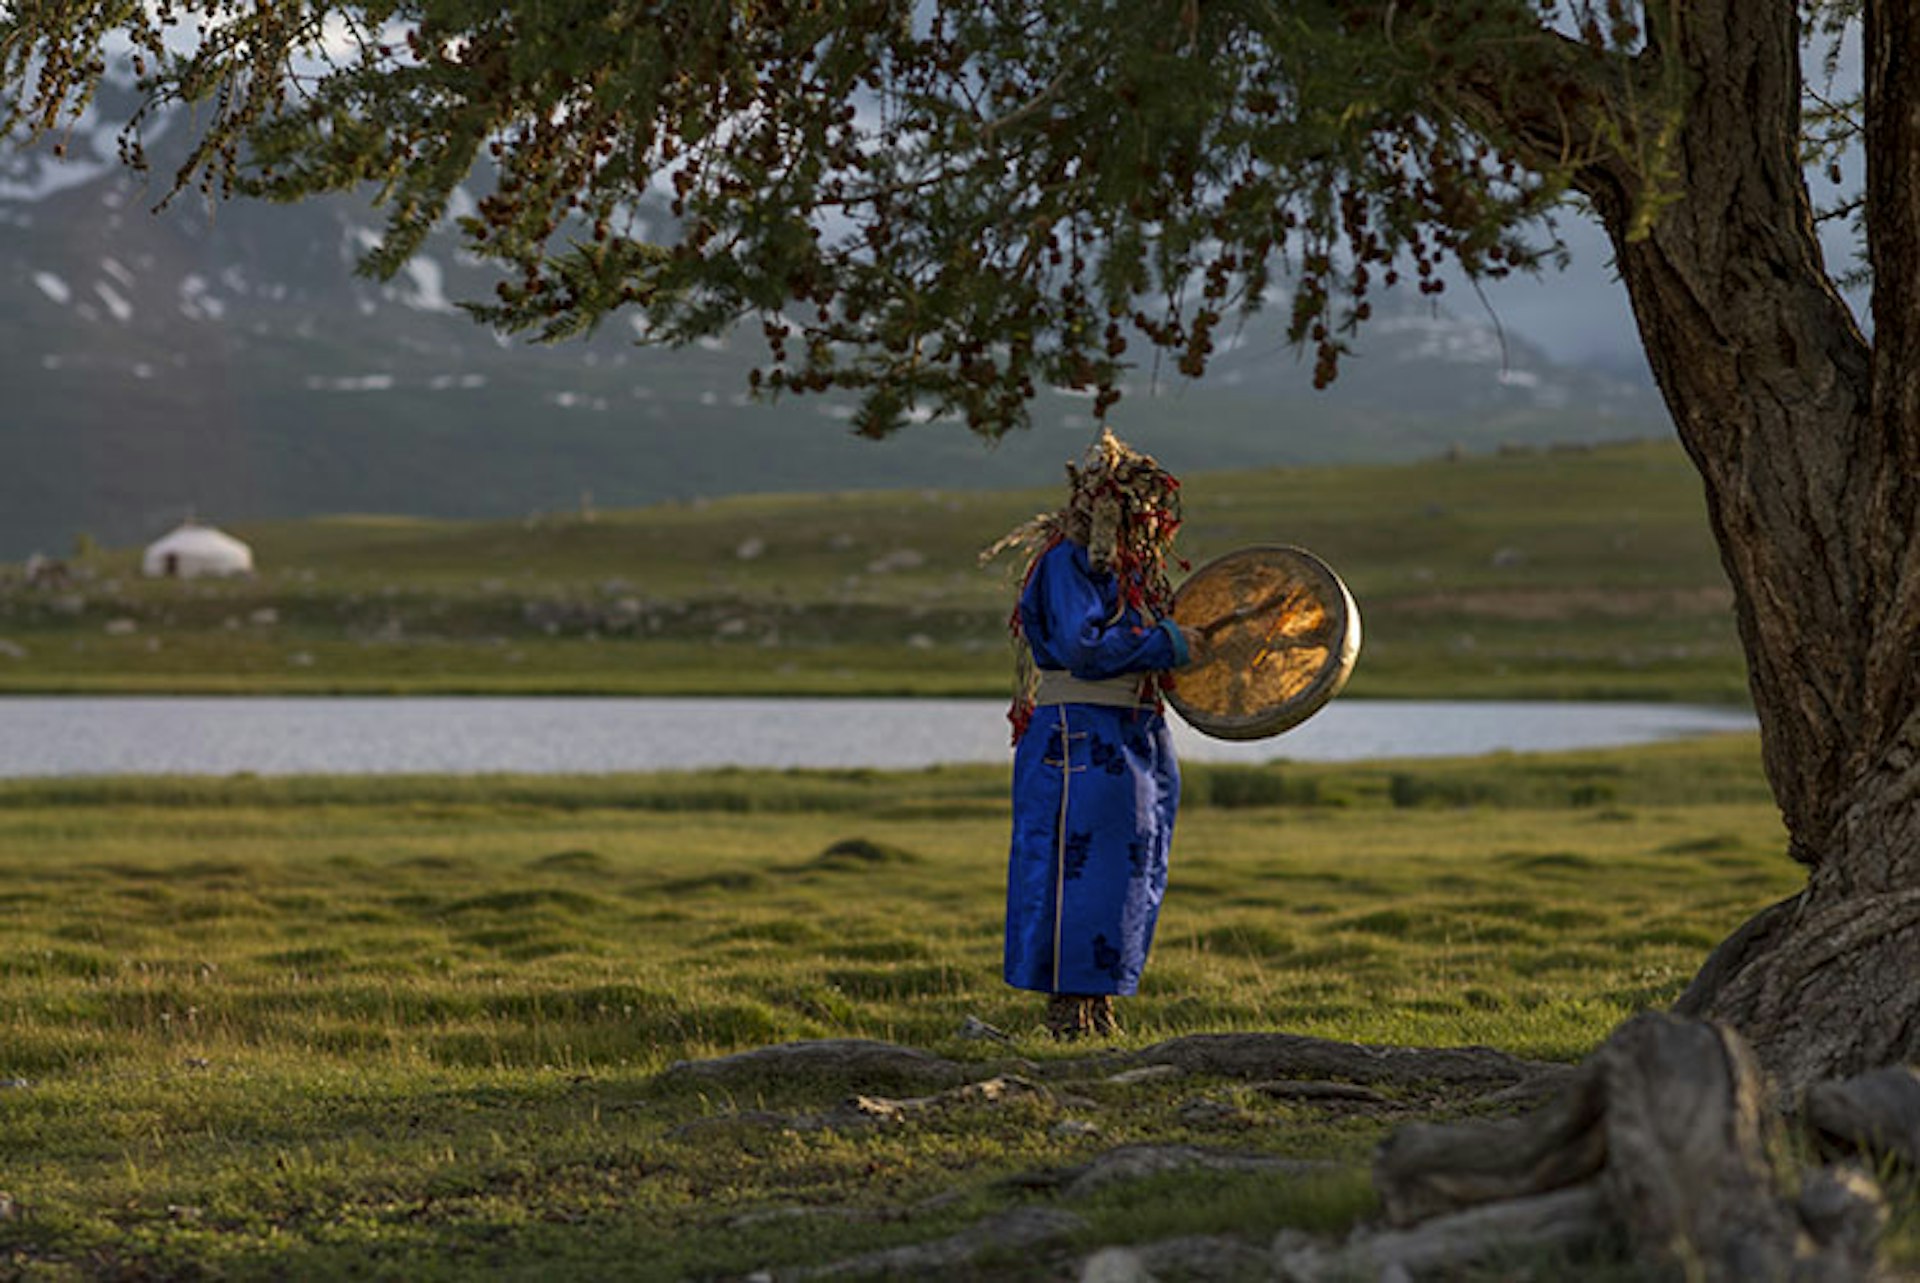 Galba performs a drum ritual. Image by David Baxendale / Lonely Planet